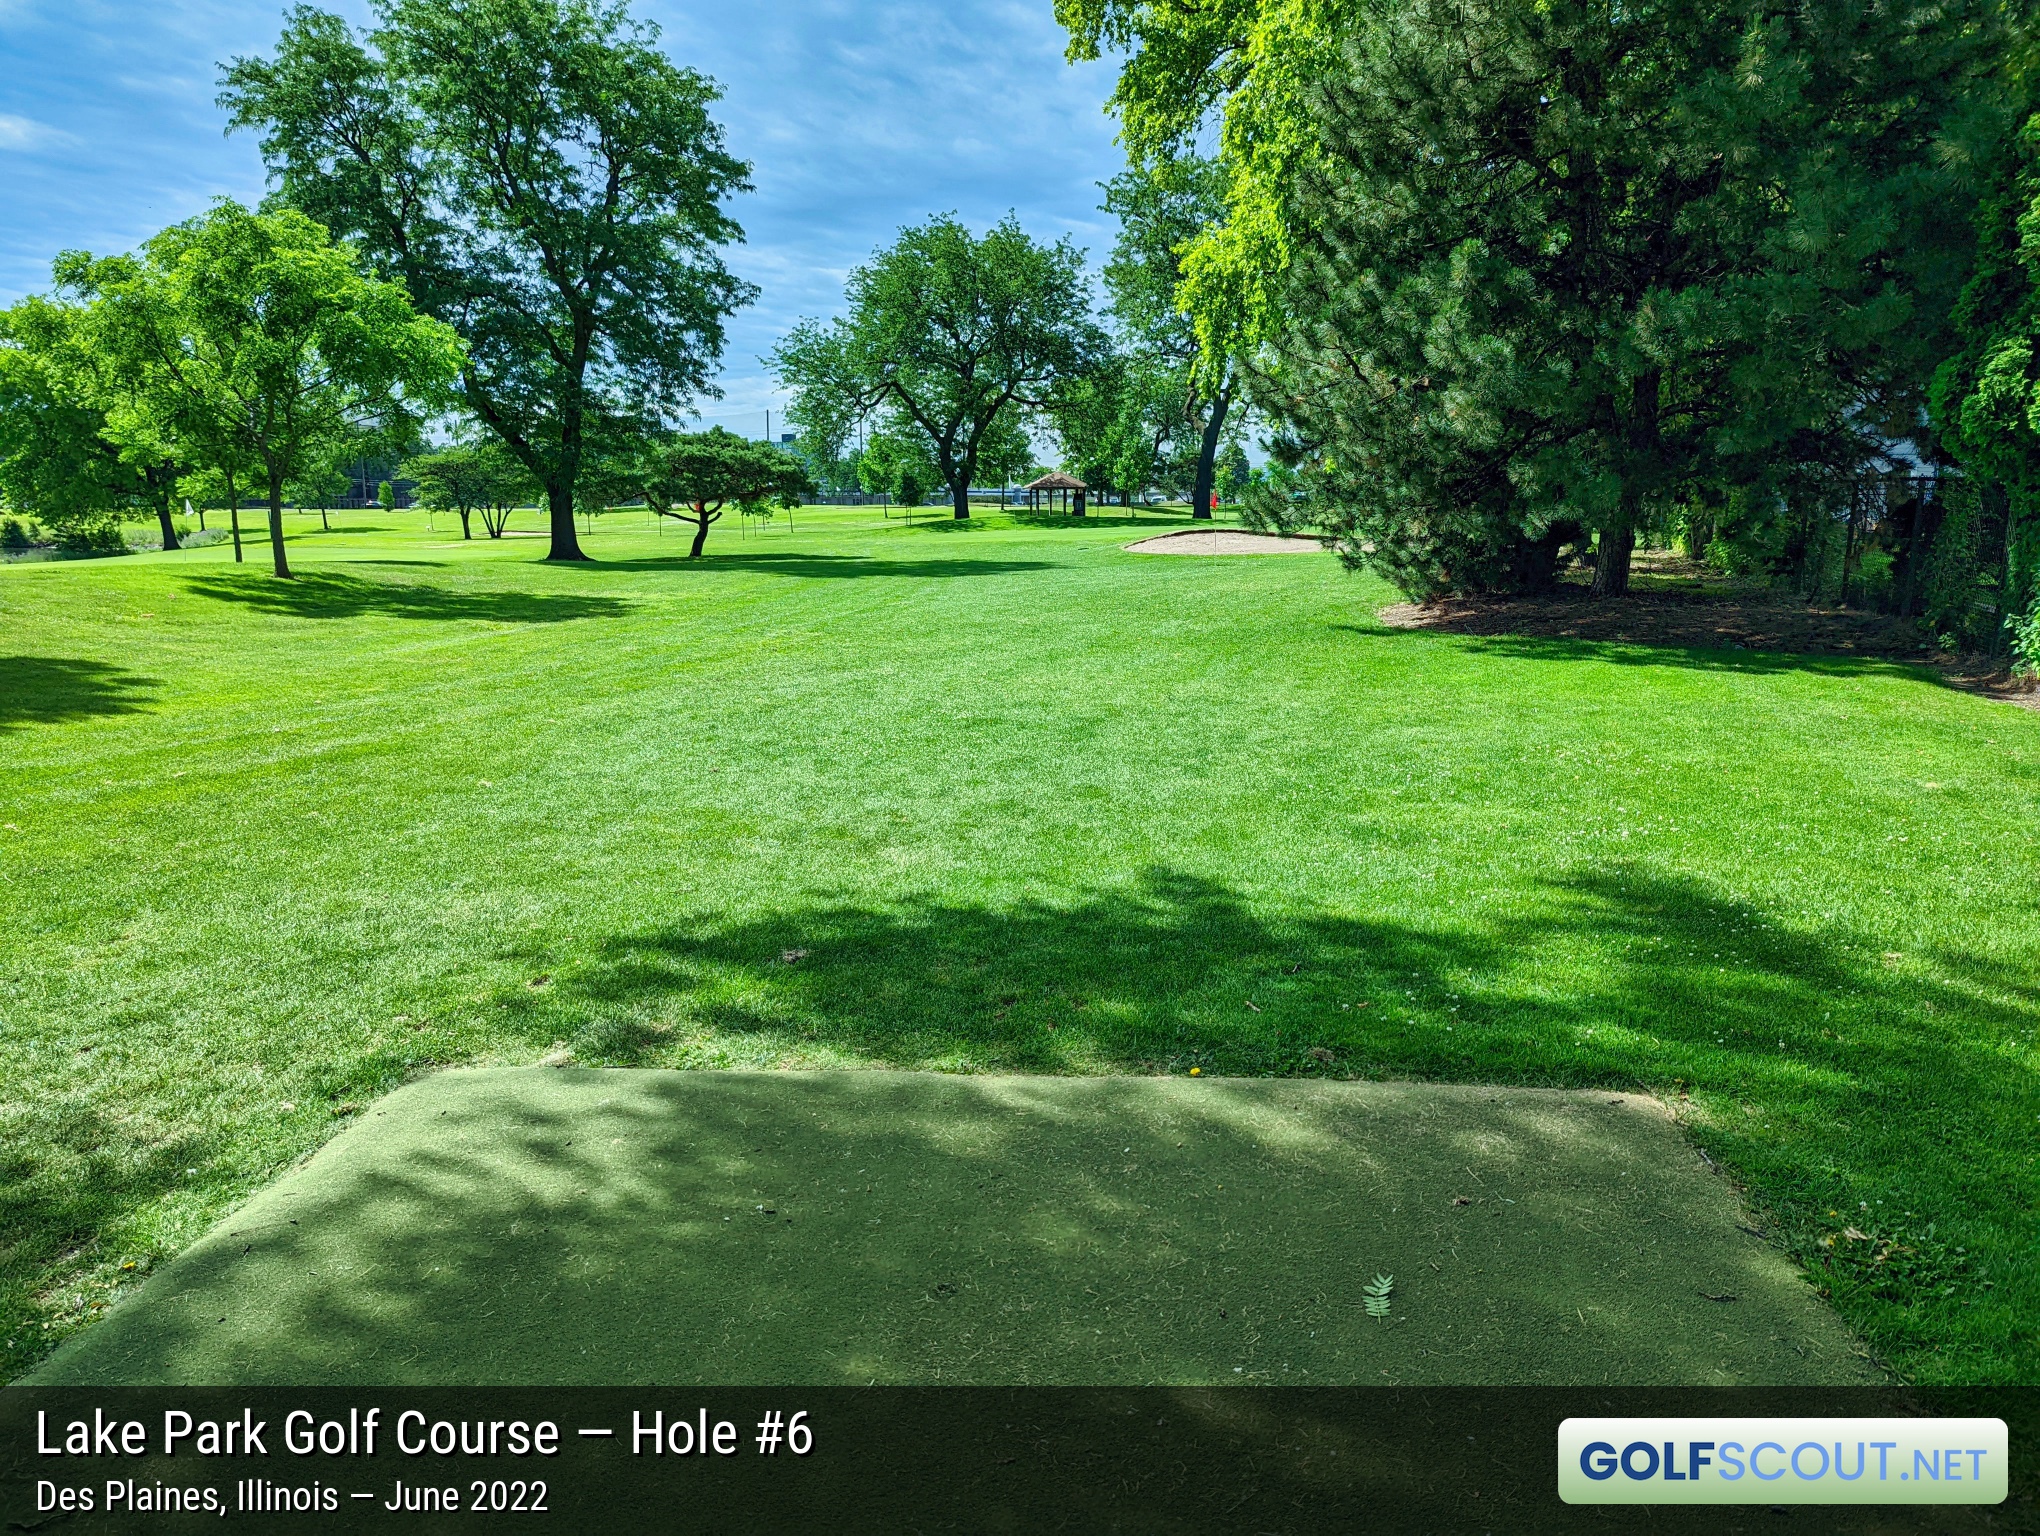 Photo of hole #6 at Lake Park Golf Course in Des Plaines, Illinois. 